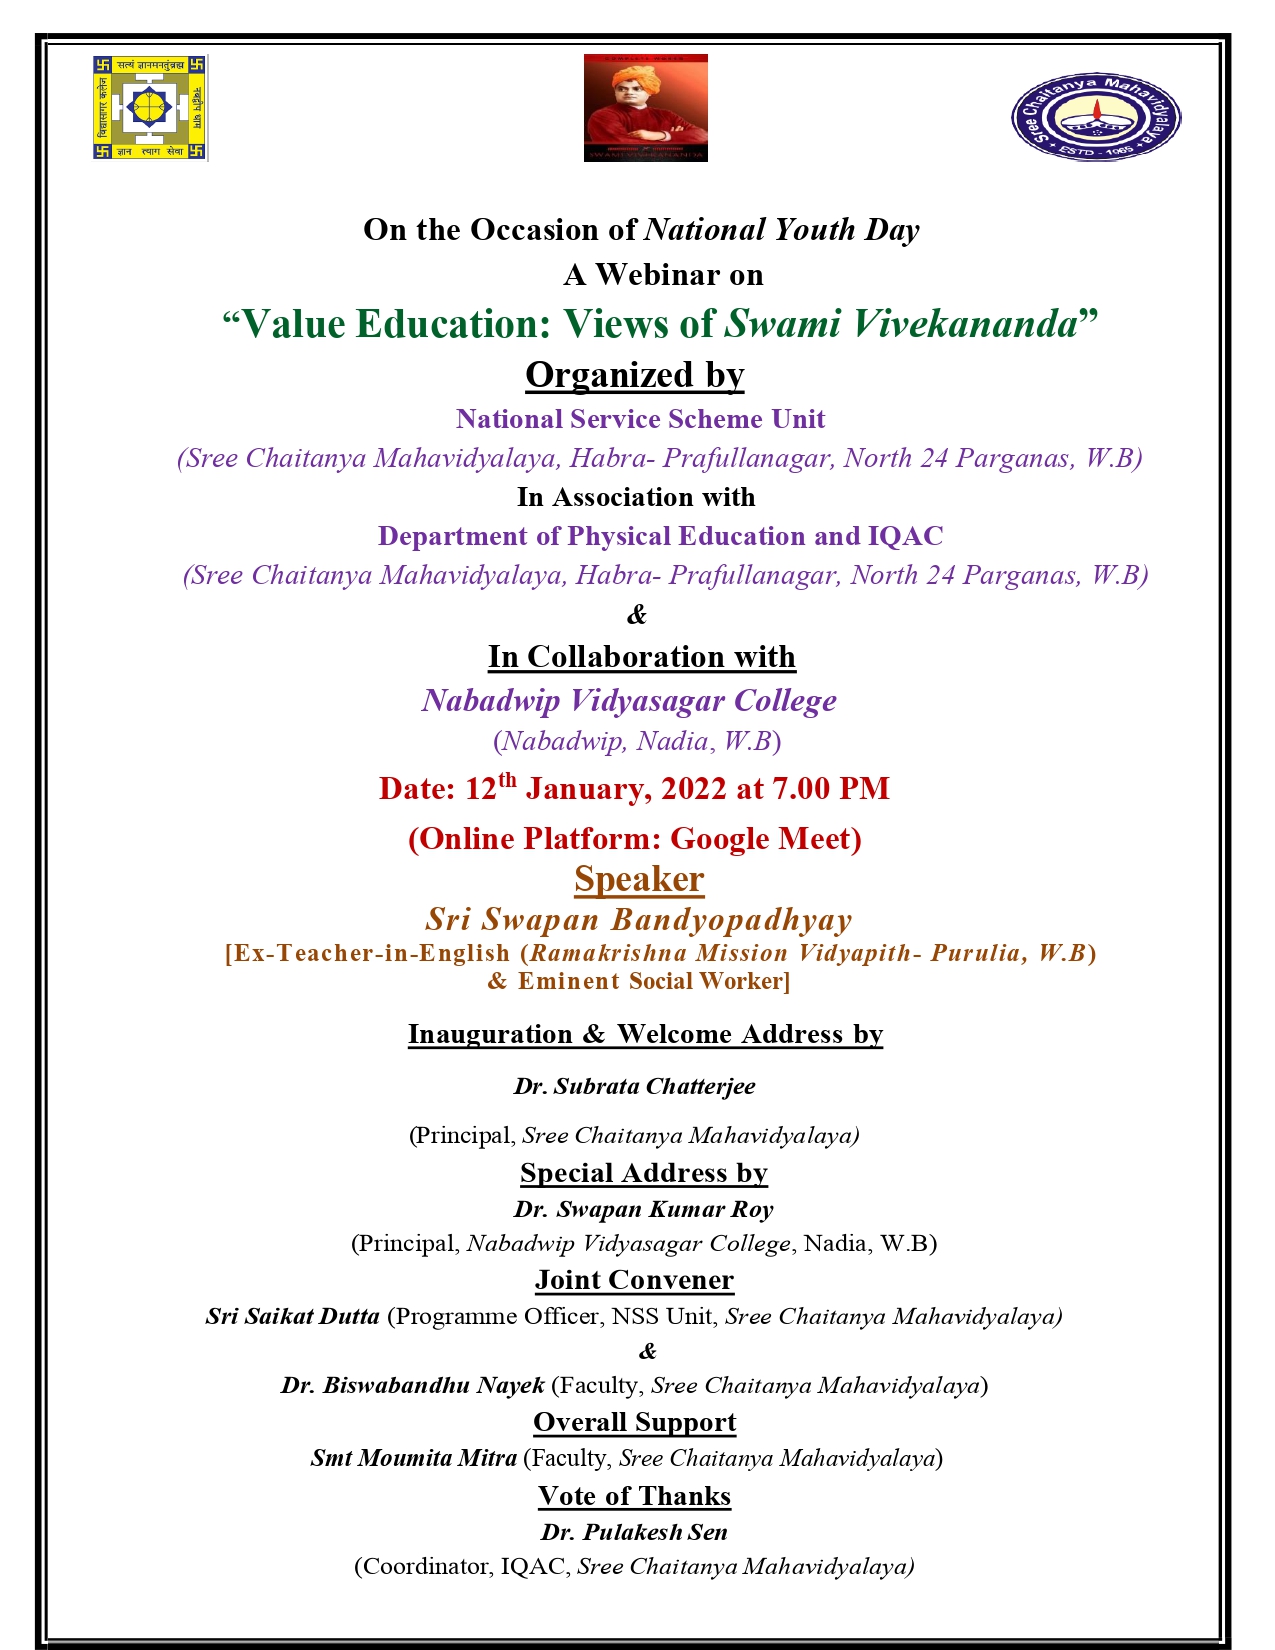 On the Occasion of National Youth Day, A Webinar on- “Value Education: Views of Swami Vivekananda” on 12/01/2022